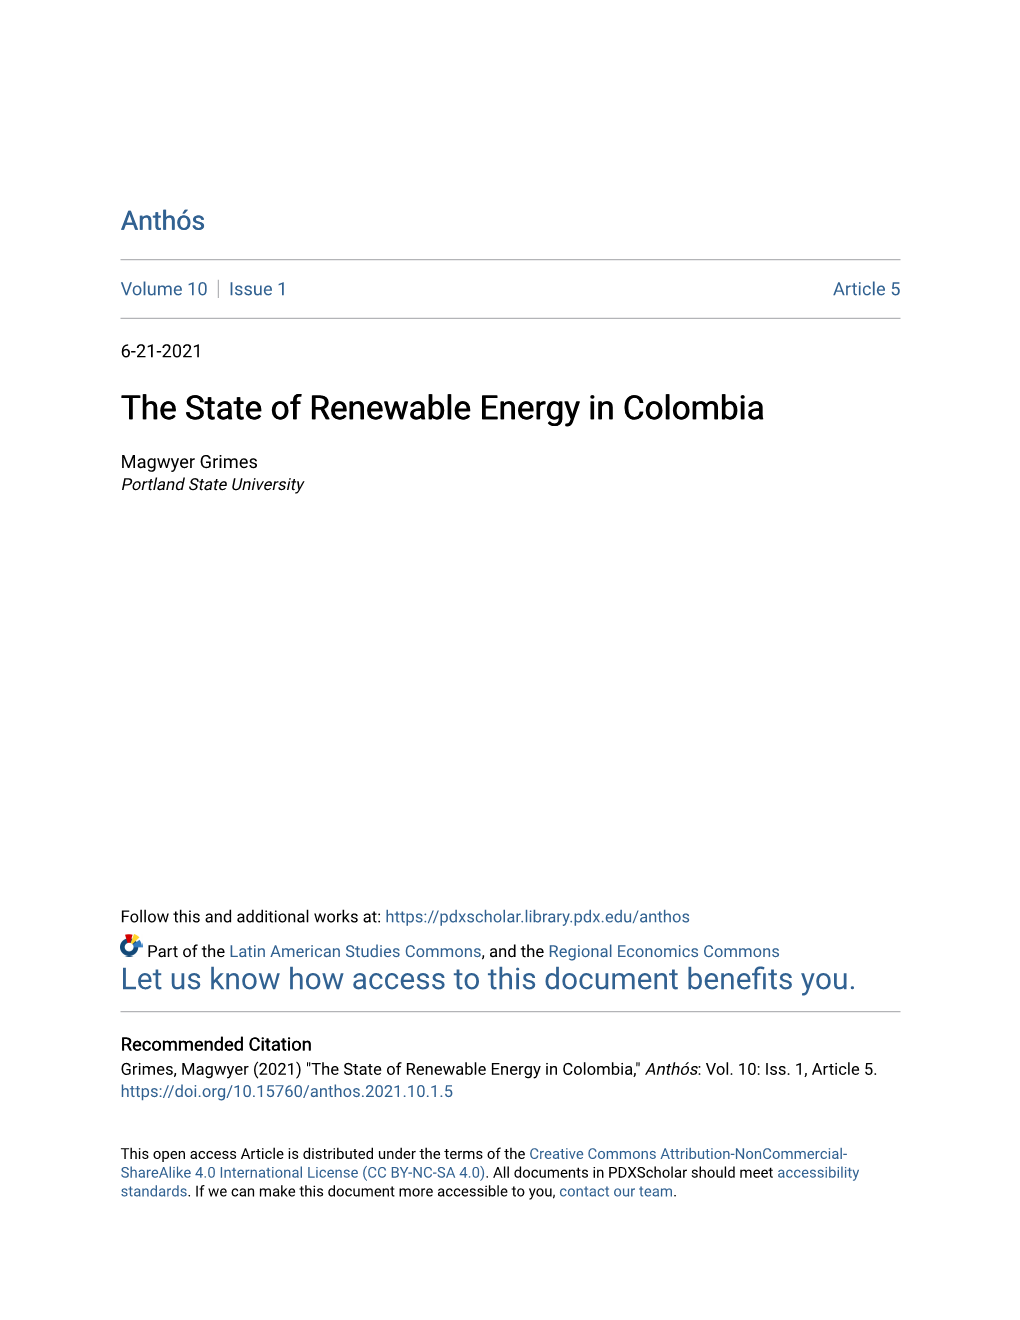 The State of Renewable Energy in Colombia